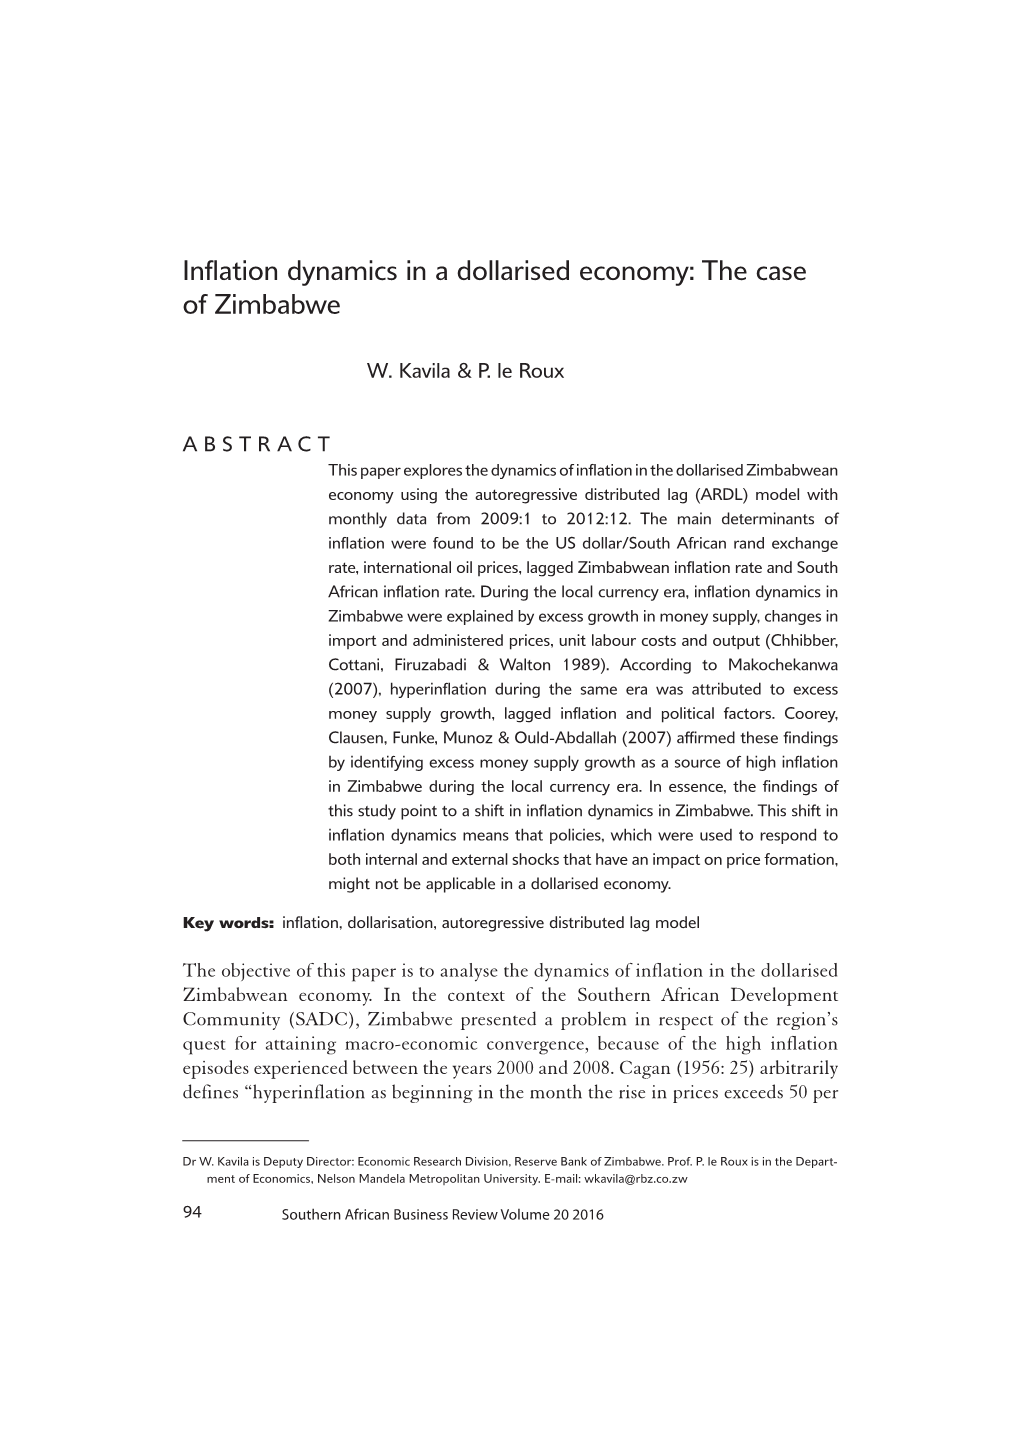 Inflation Dynamics in a Dollarised Economy